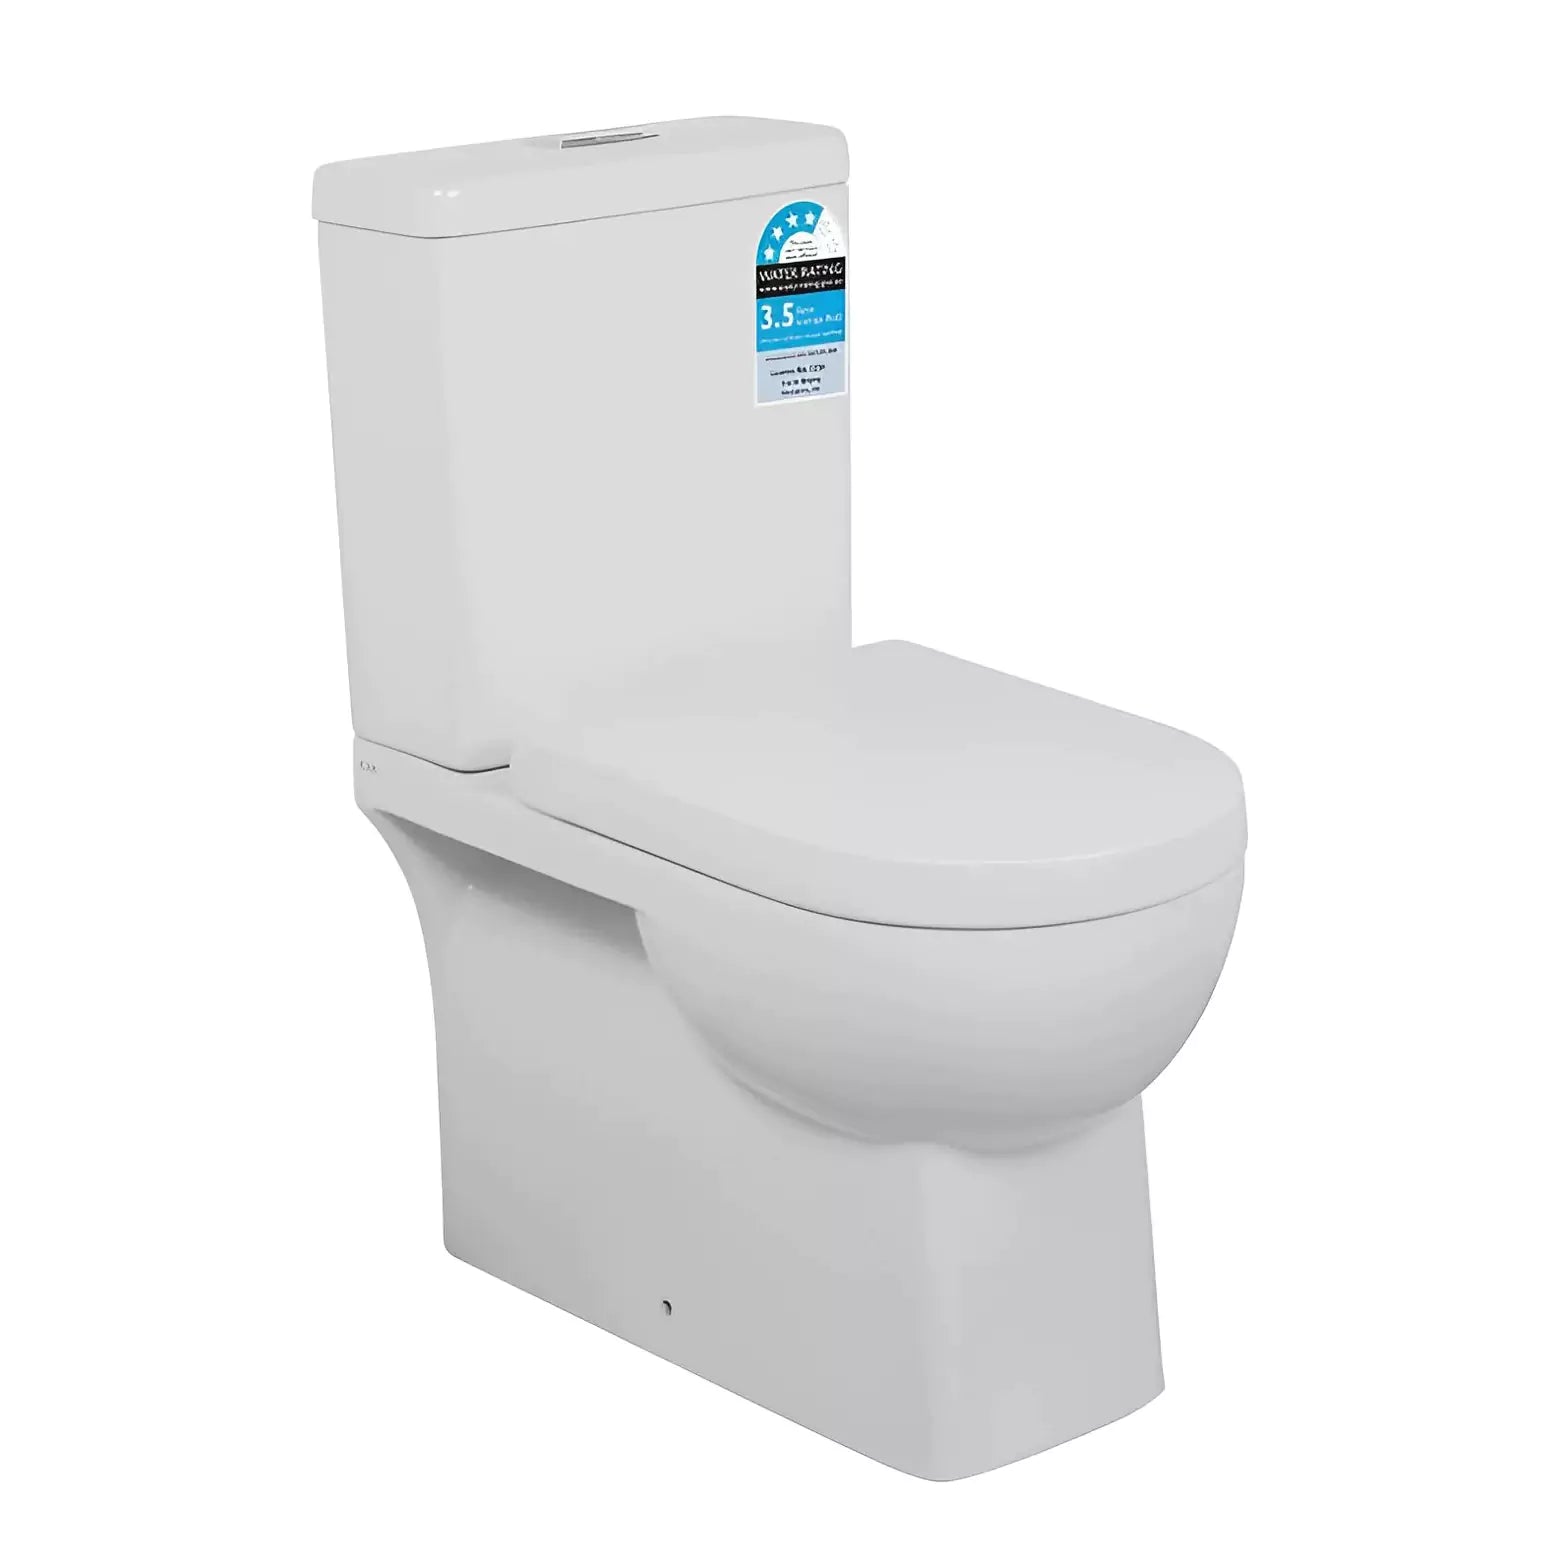 Teo Back To Wall Toilet Suite: Modern Design for Efficient Space Use-Gloss White-KDK016C/KDK016P